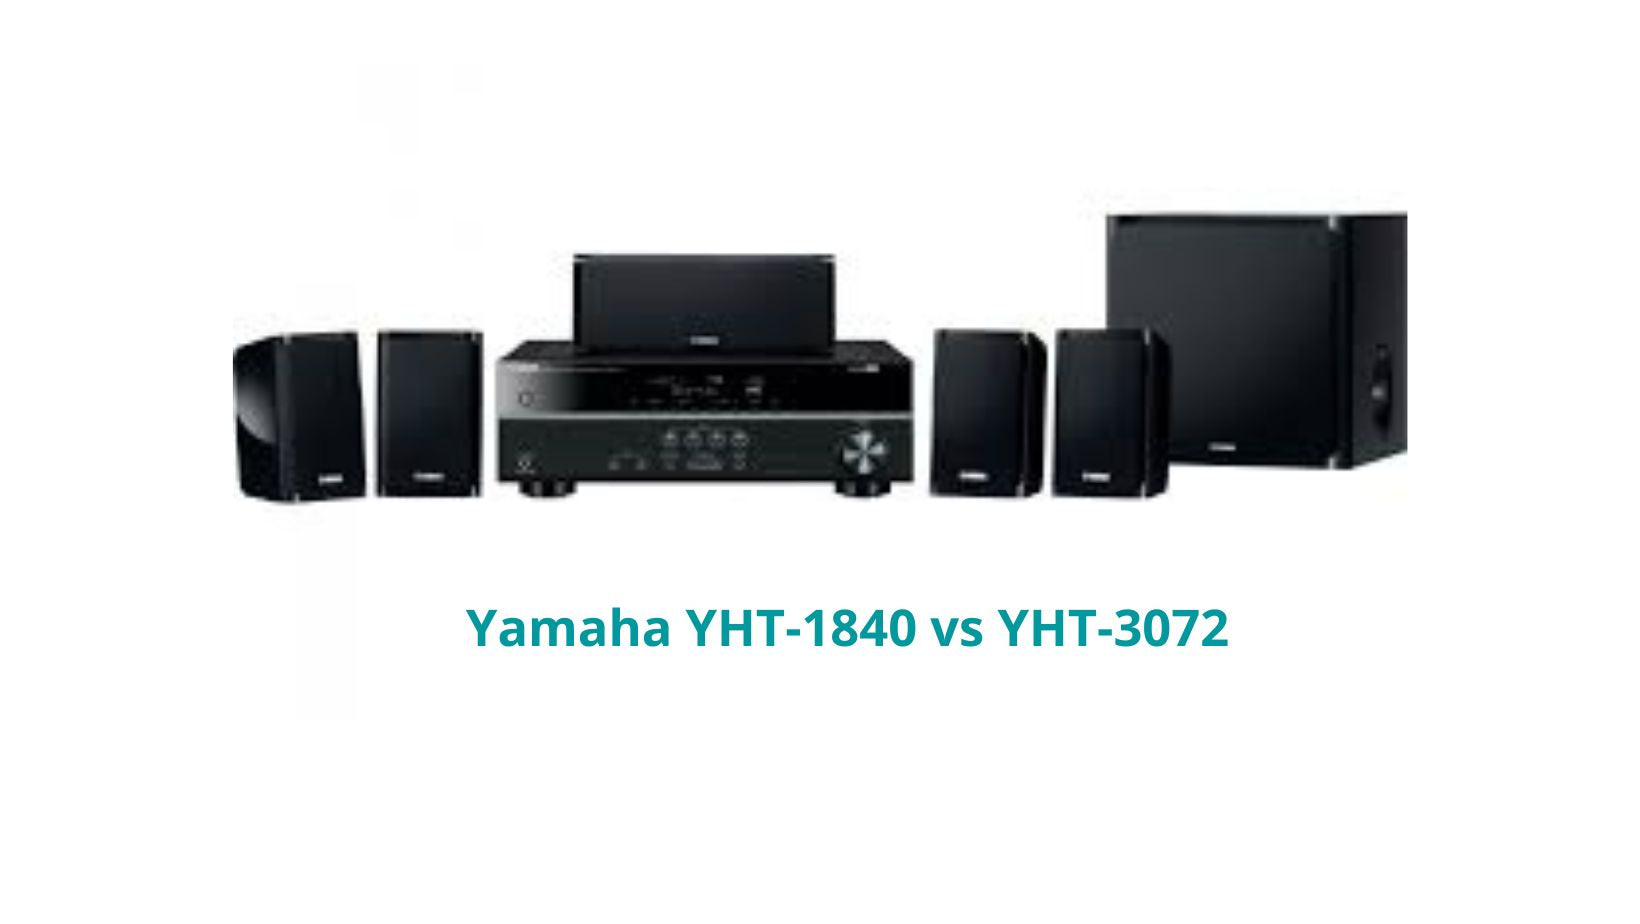 Yamaha YHT-1840 vs YHT-3072 Which is Better Home Theatre System?